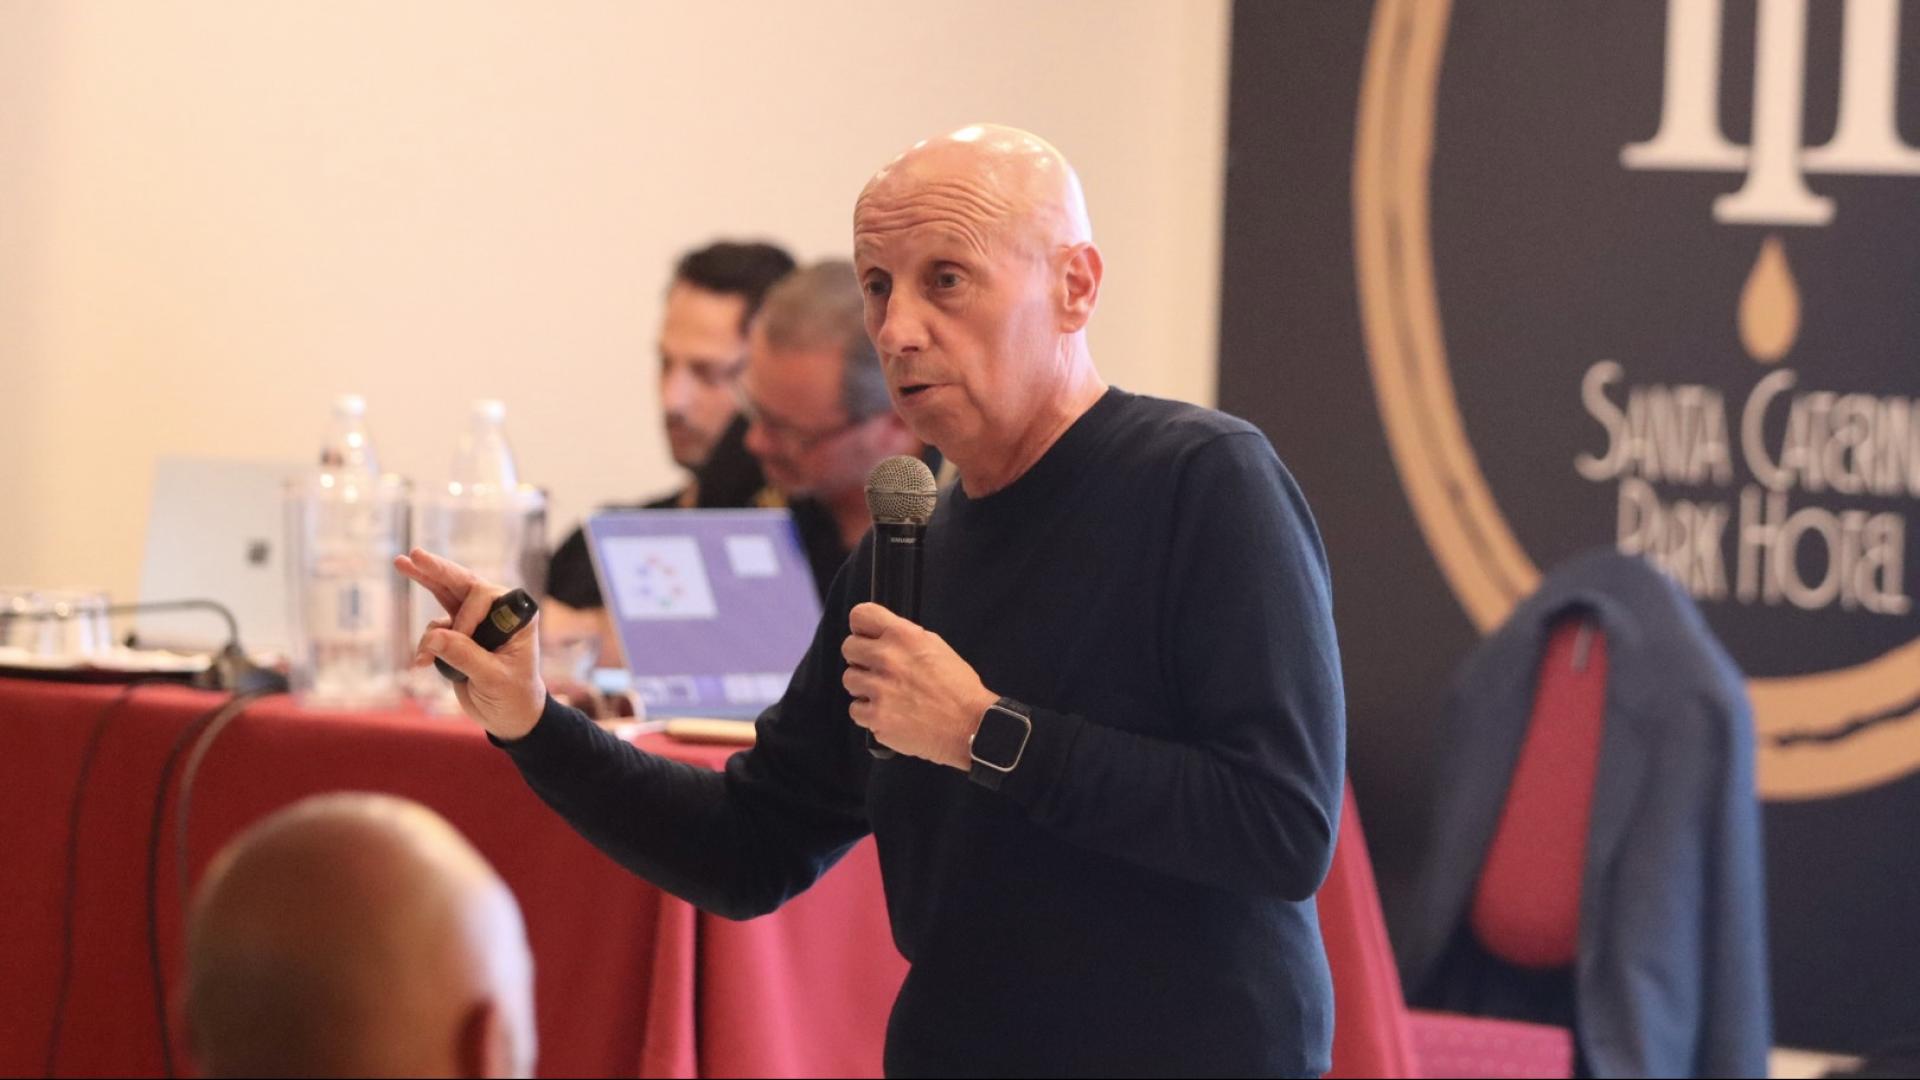 Coaching course: Maurizio Viscidi guest speaker at the second appointment